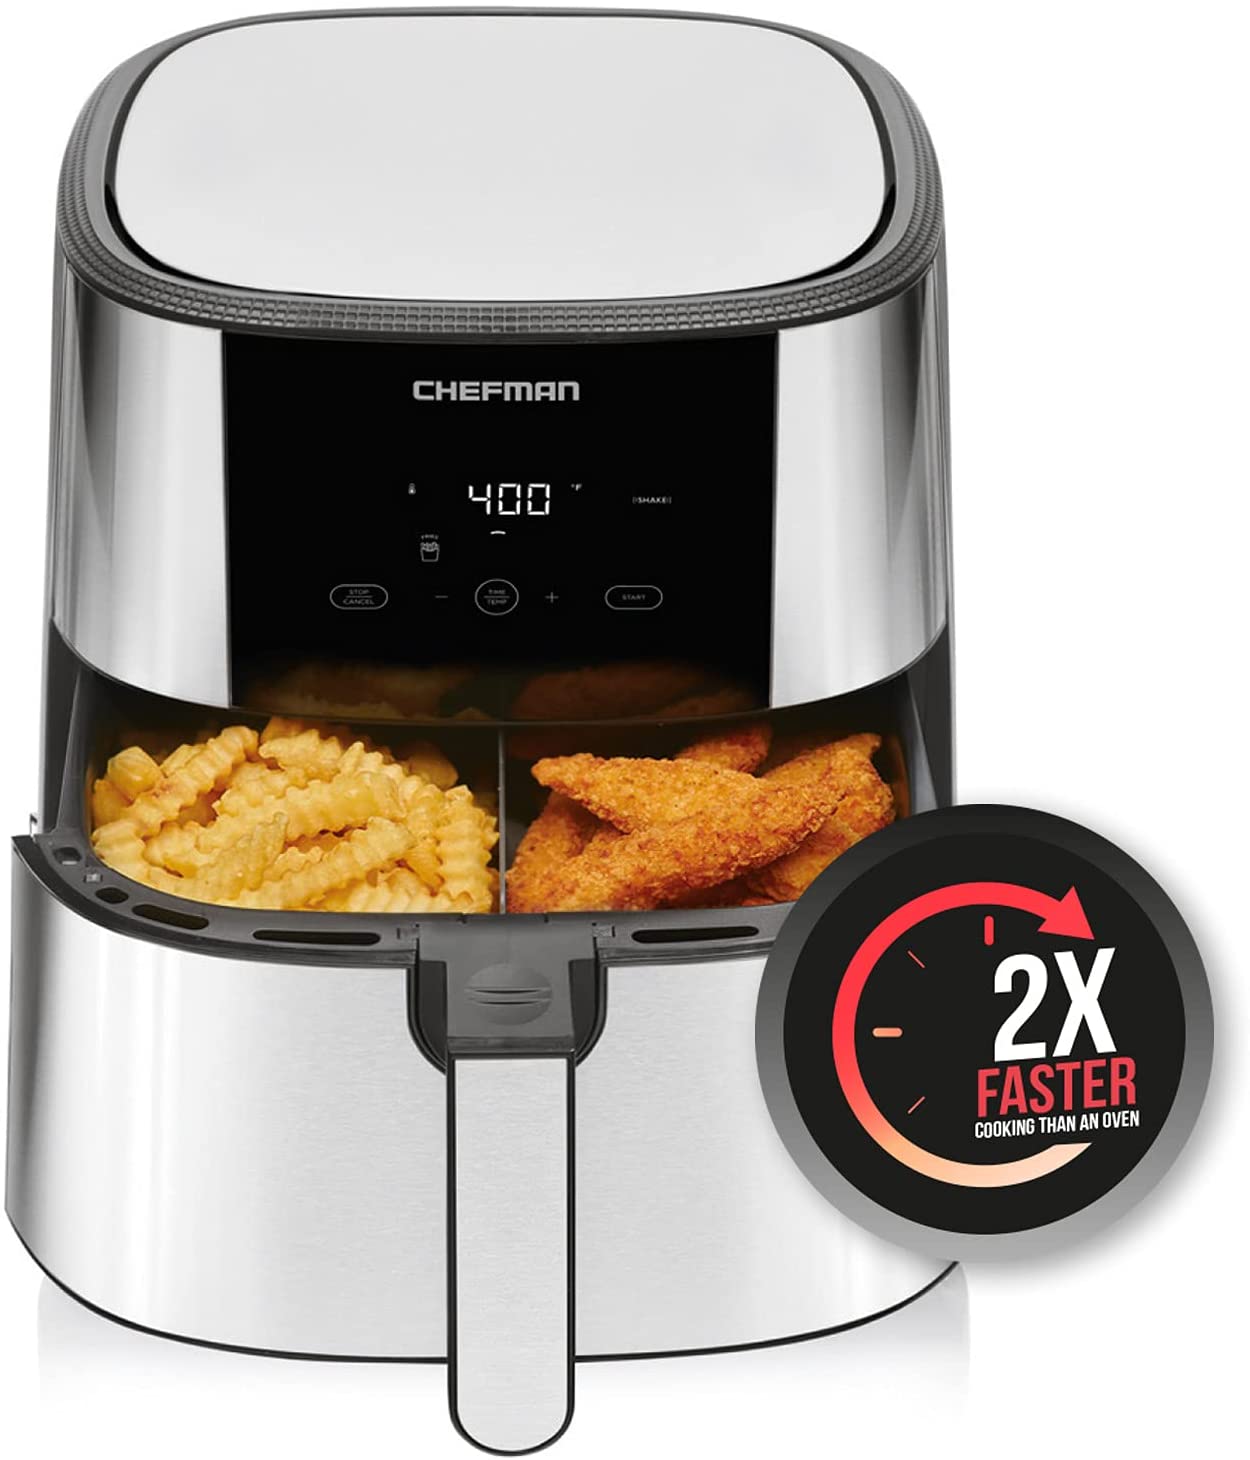 Chefman Turbo Fry Stainless Steel Air Fryer with Basket Divider, 8 Quart - image 1 of 9